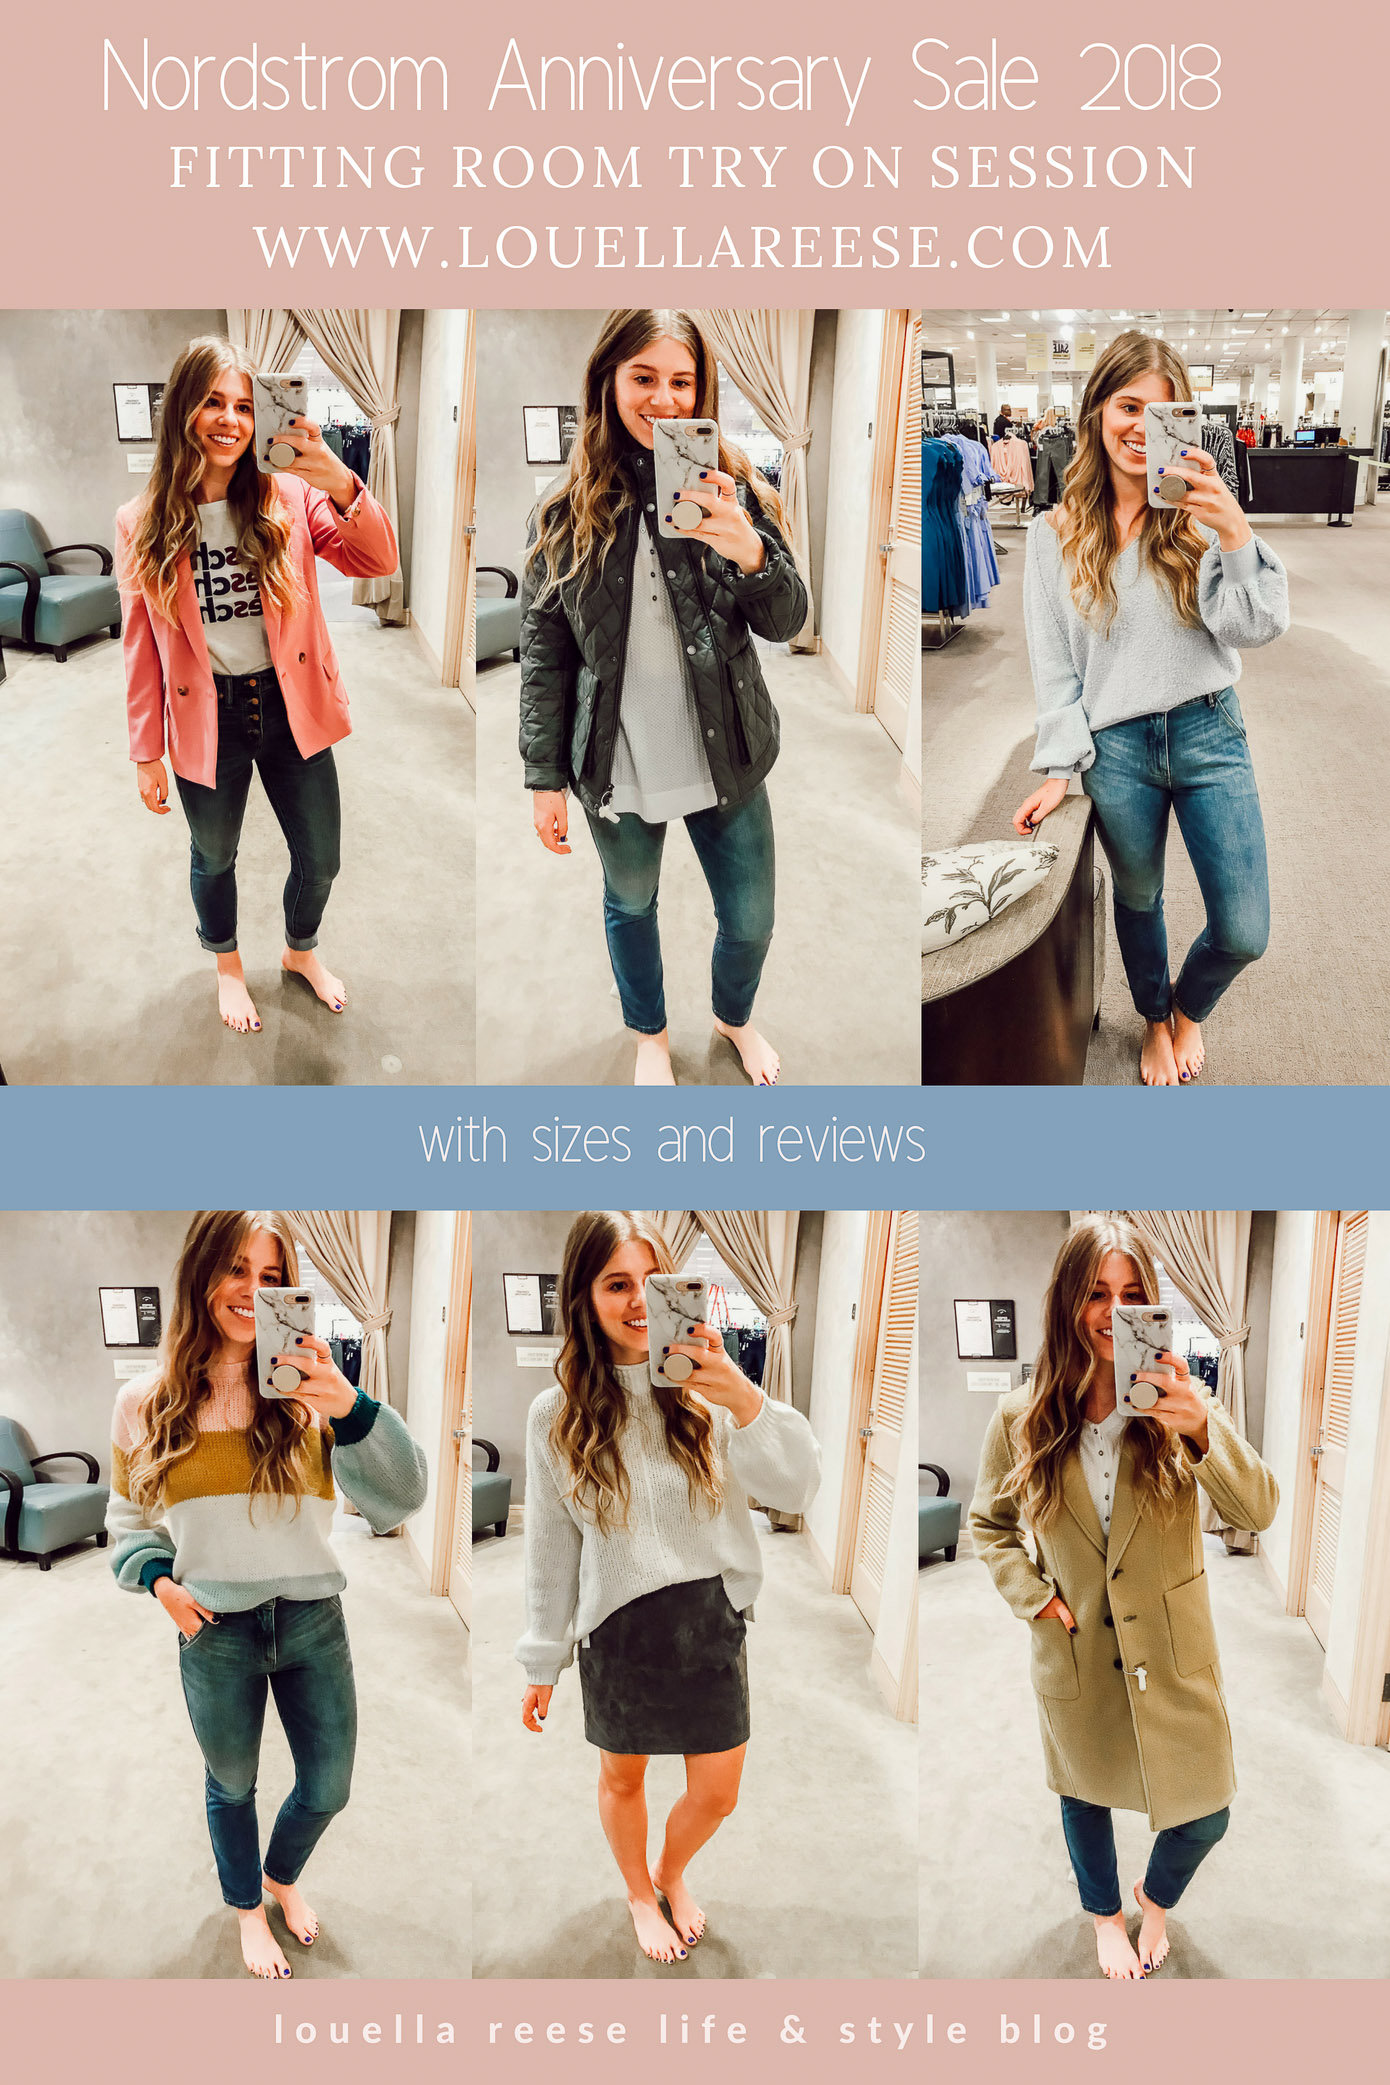 2018 Nordstrom Anniversary Fitting Room Session featured on Louella Reese Life & Style Blog